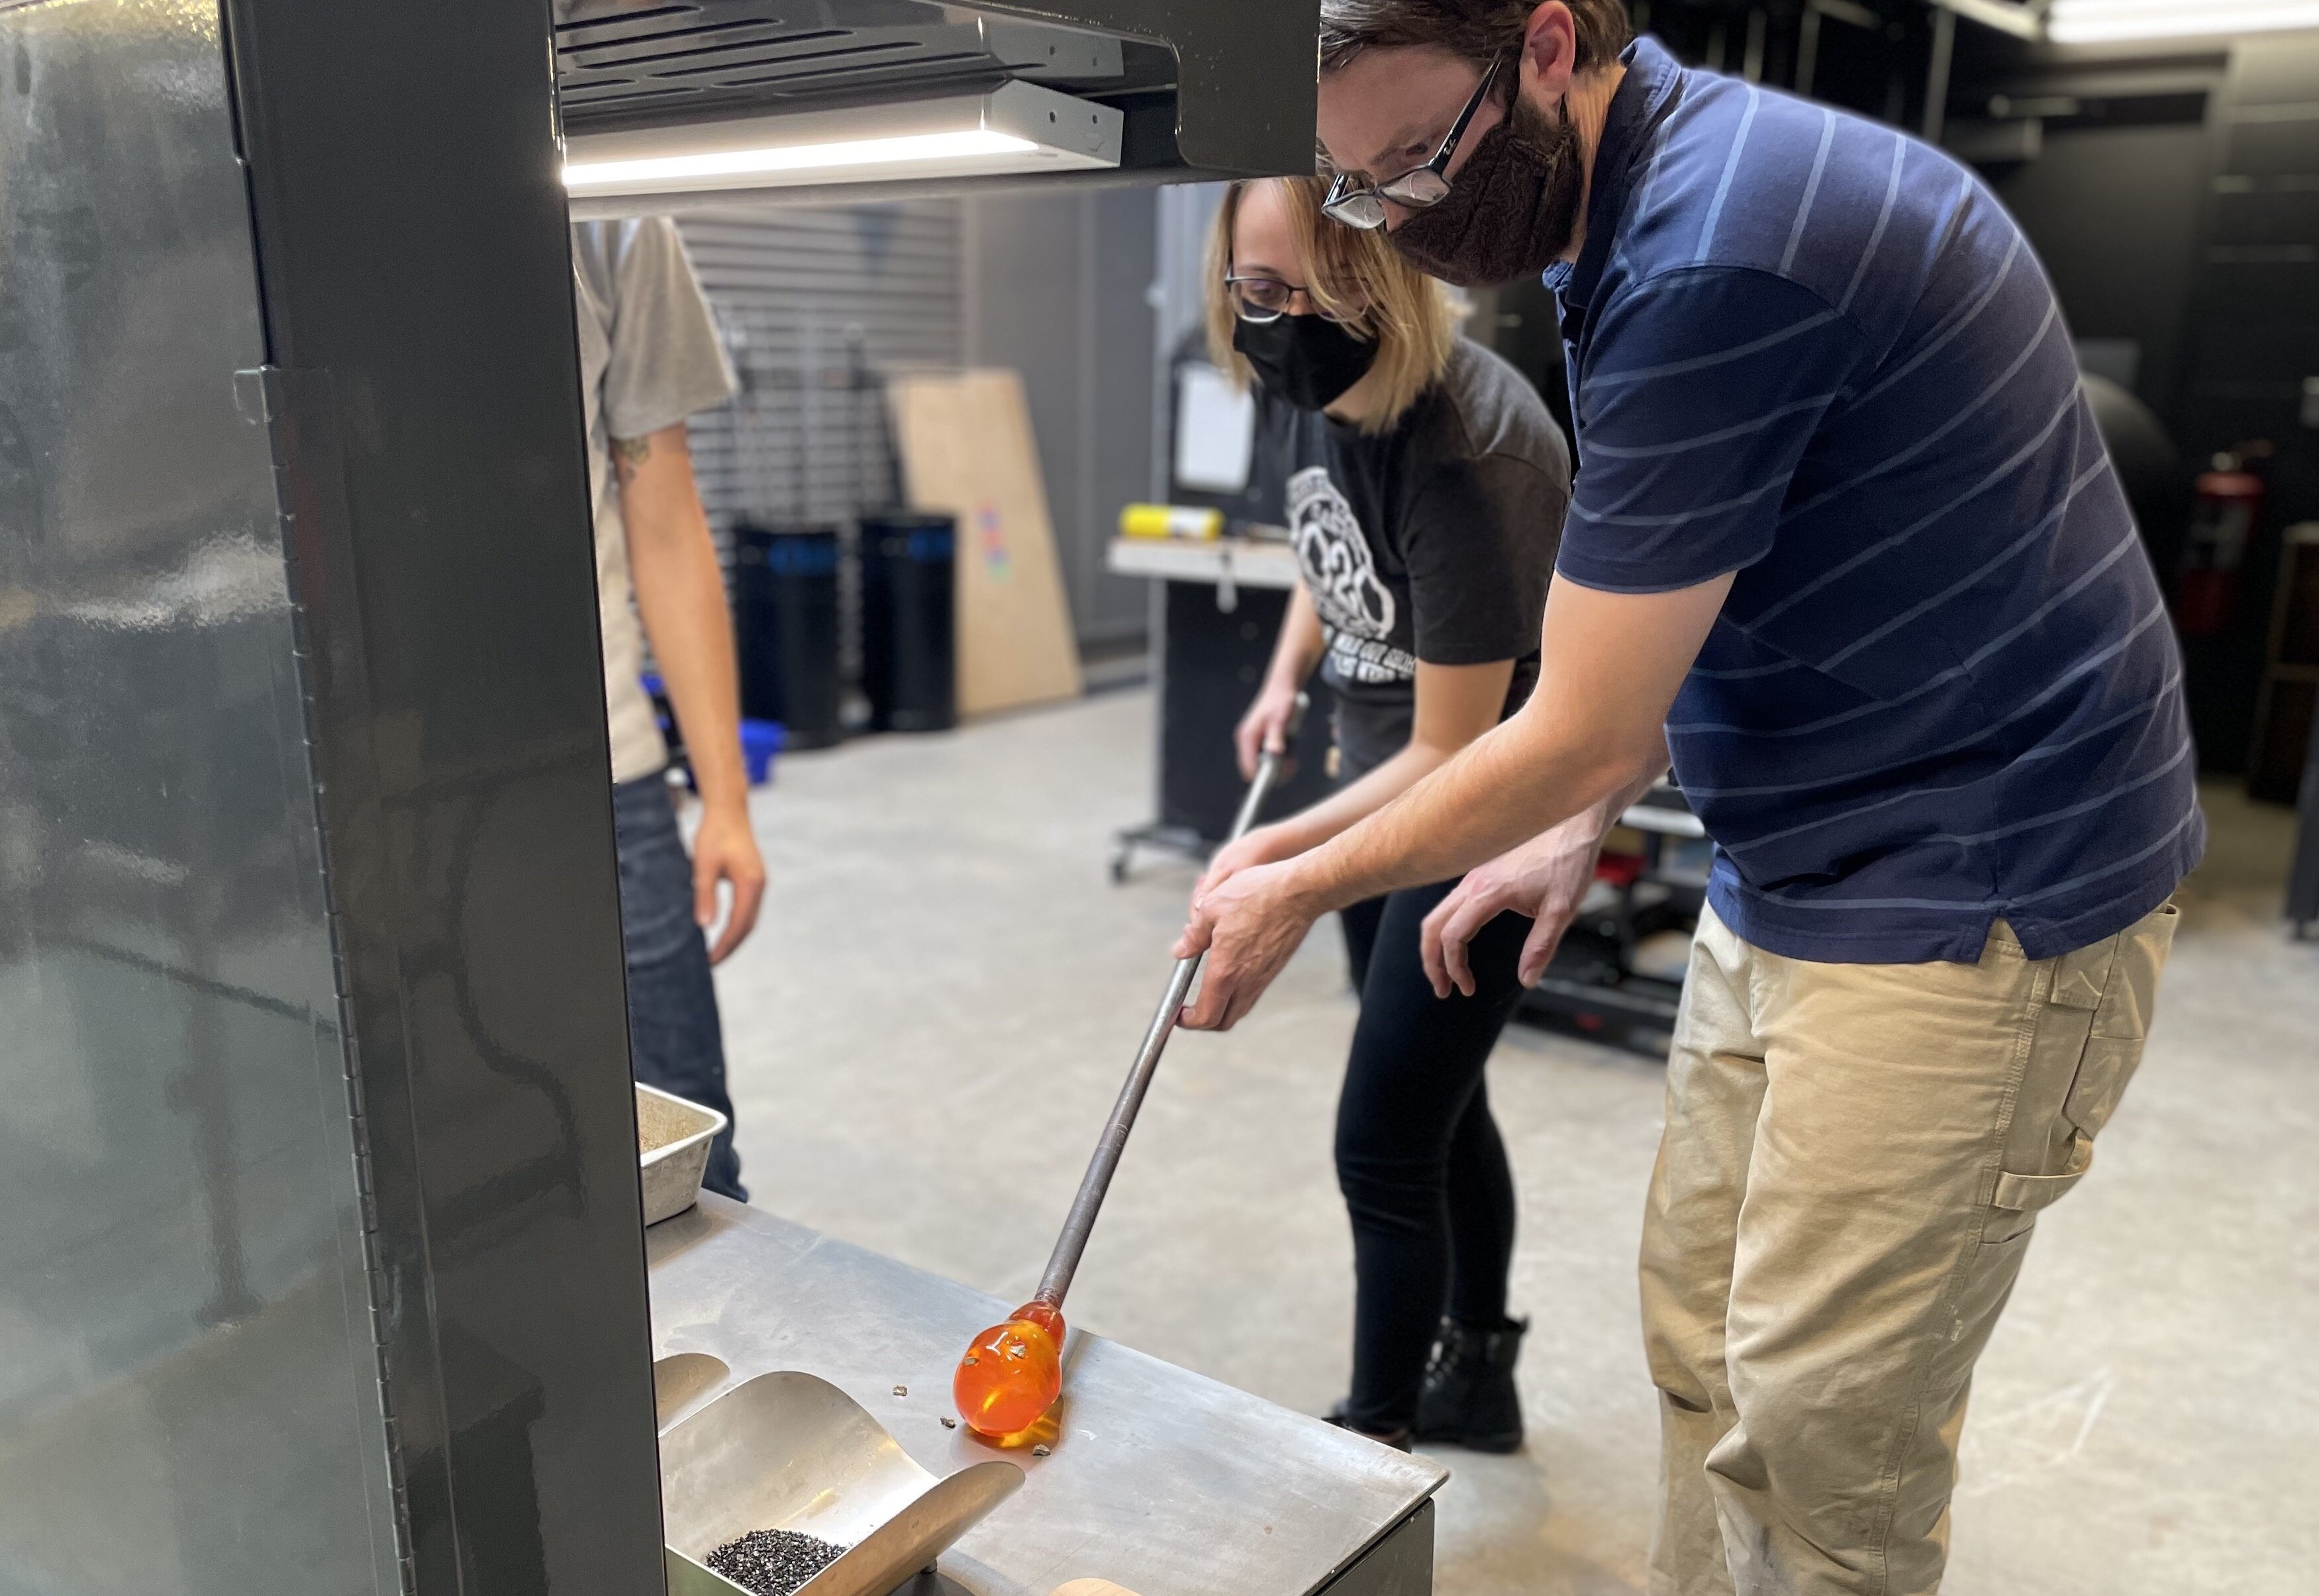 “The instructors are great, they walk you through everything to make sure you do it safely.” - Josie Anderson, UM-Flint student, pictured here working with FIA glass programs manager Brent Swanson.